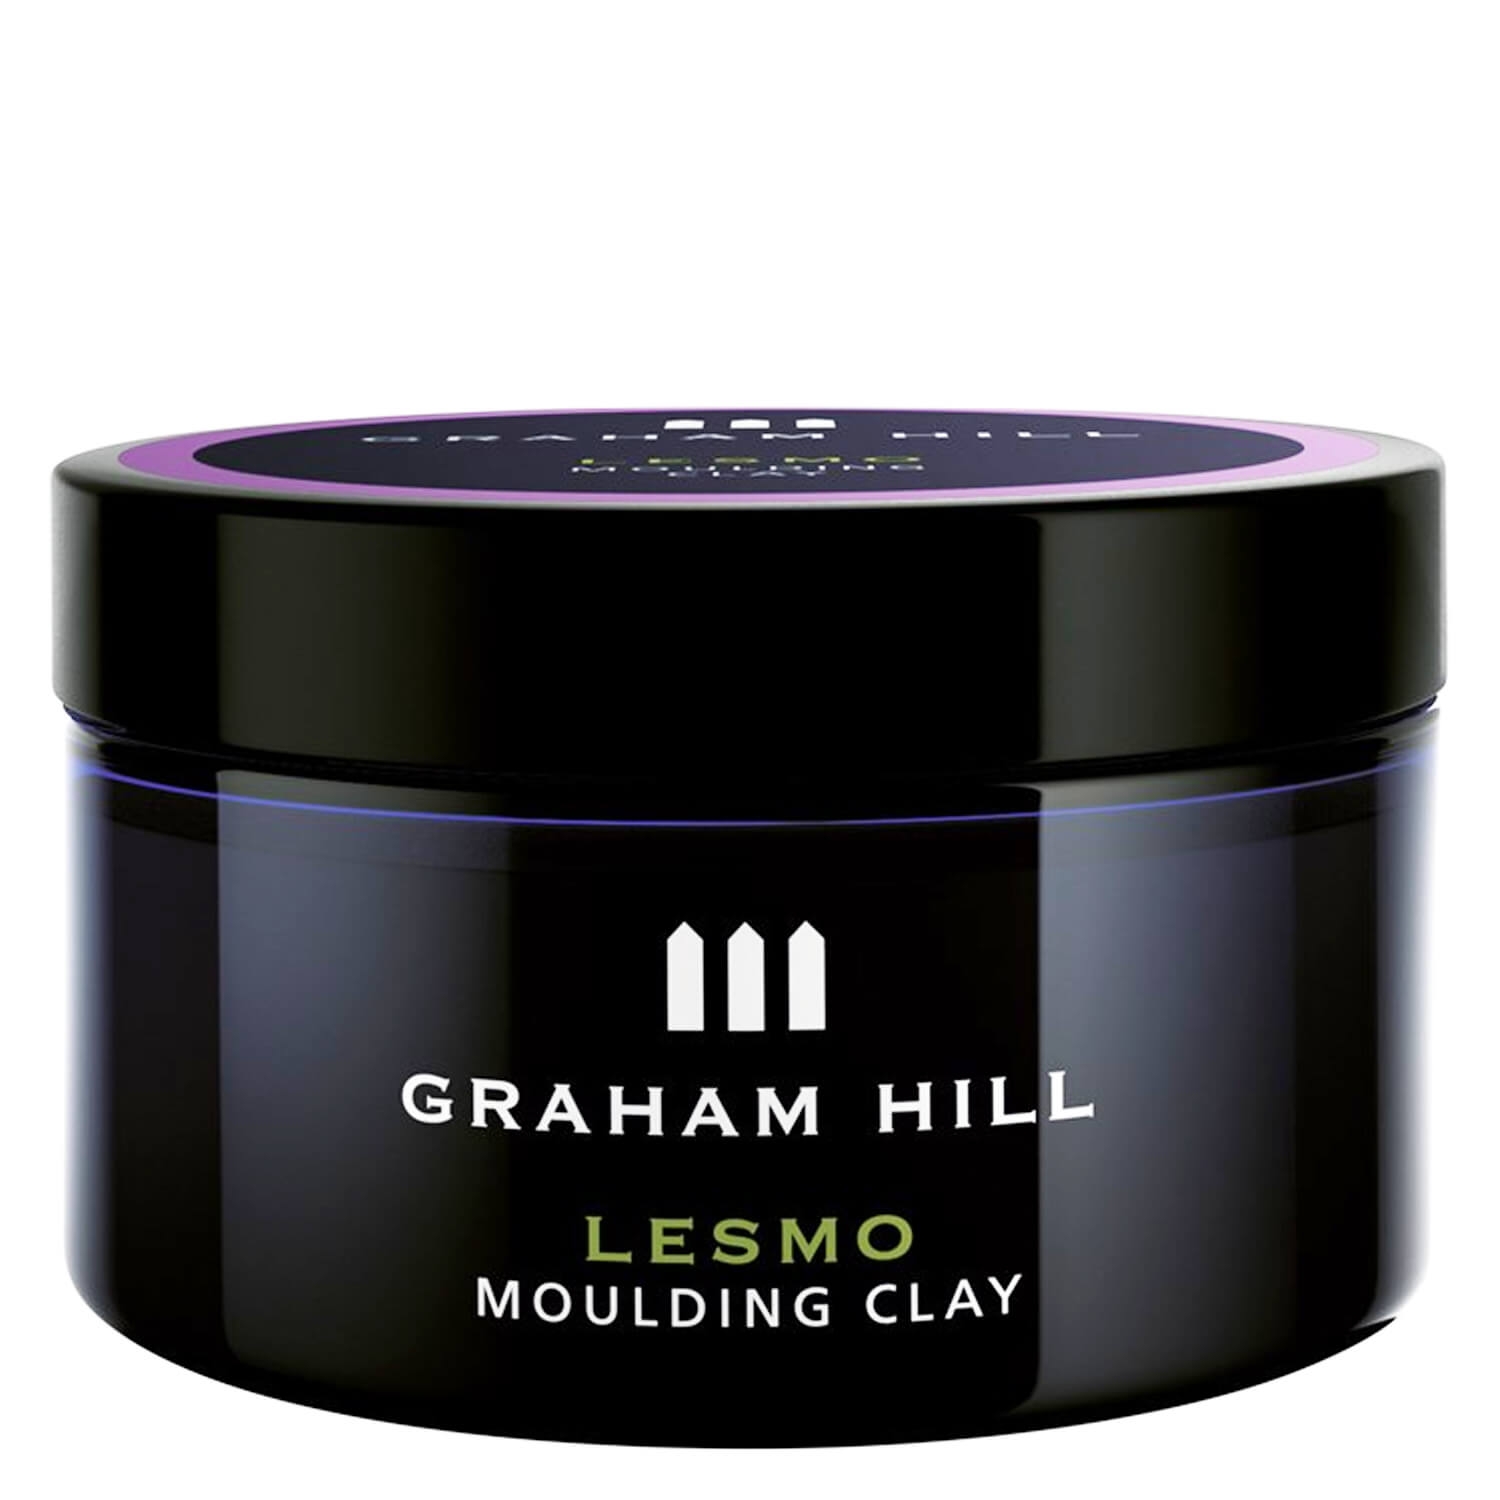 Product image from Styling & Grooming - Lesmo Moulding Clay